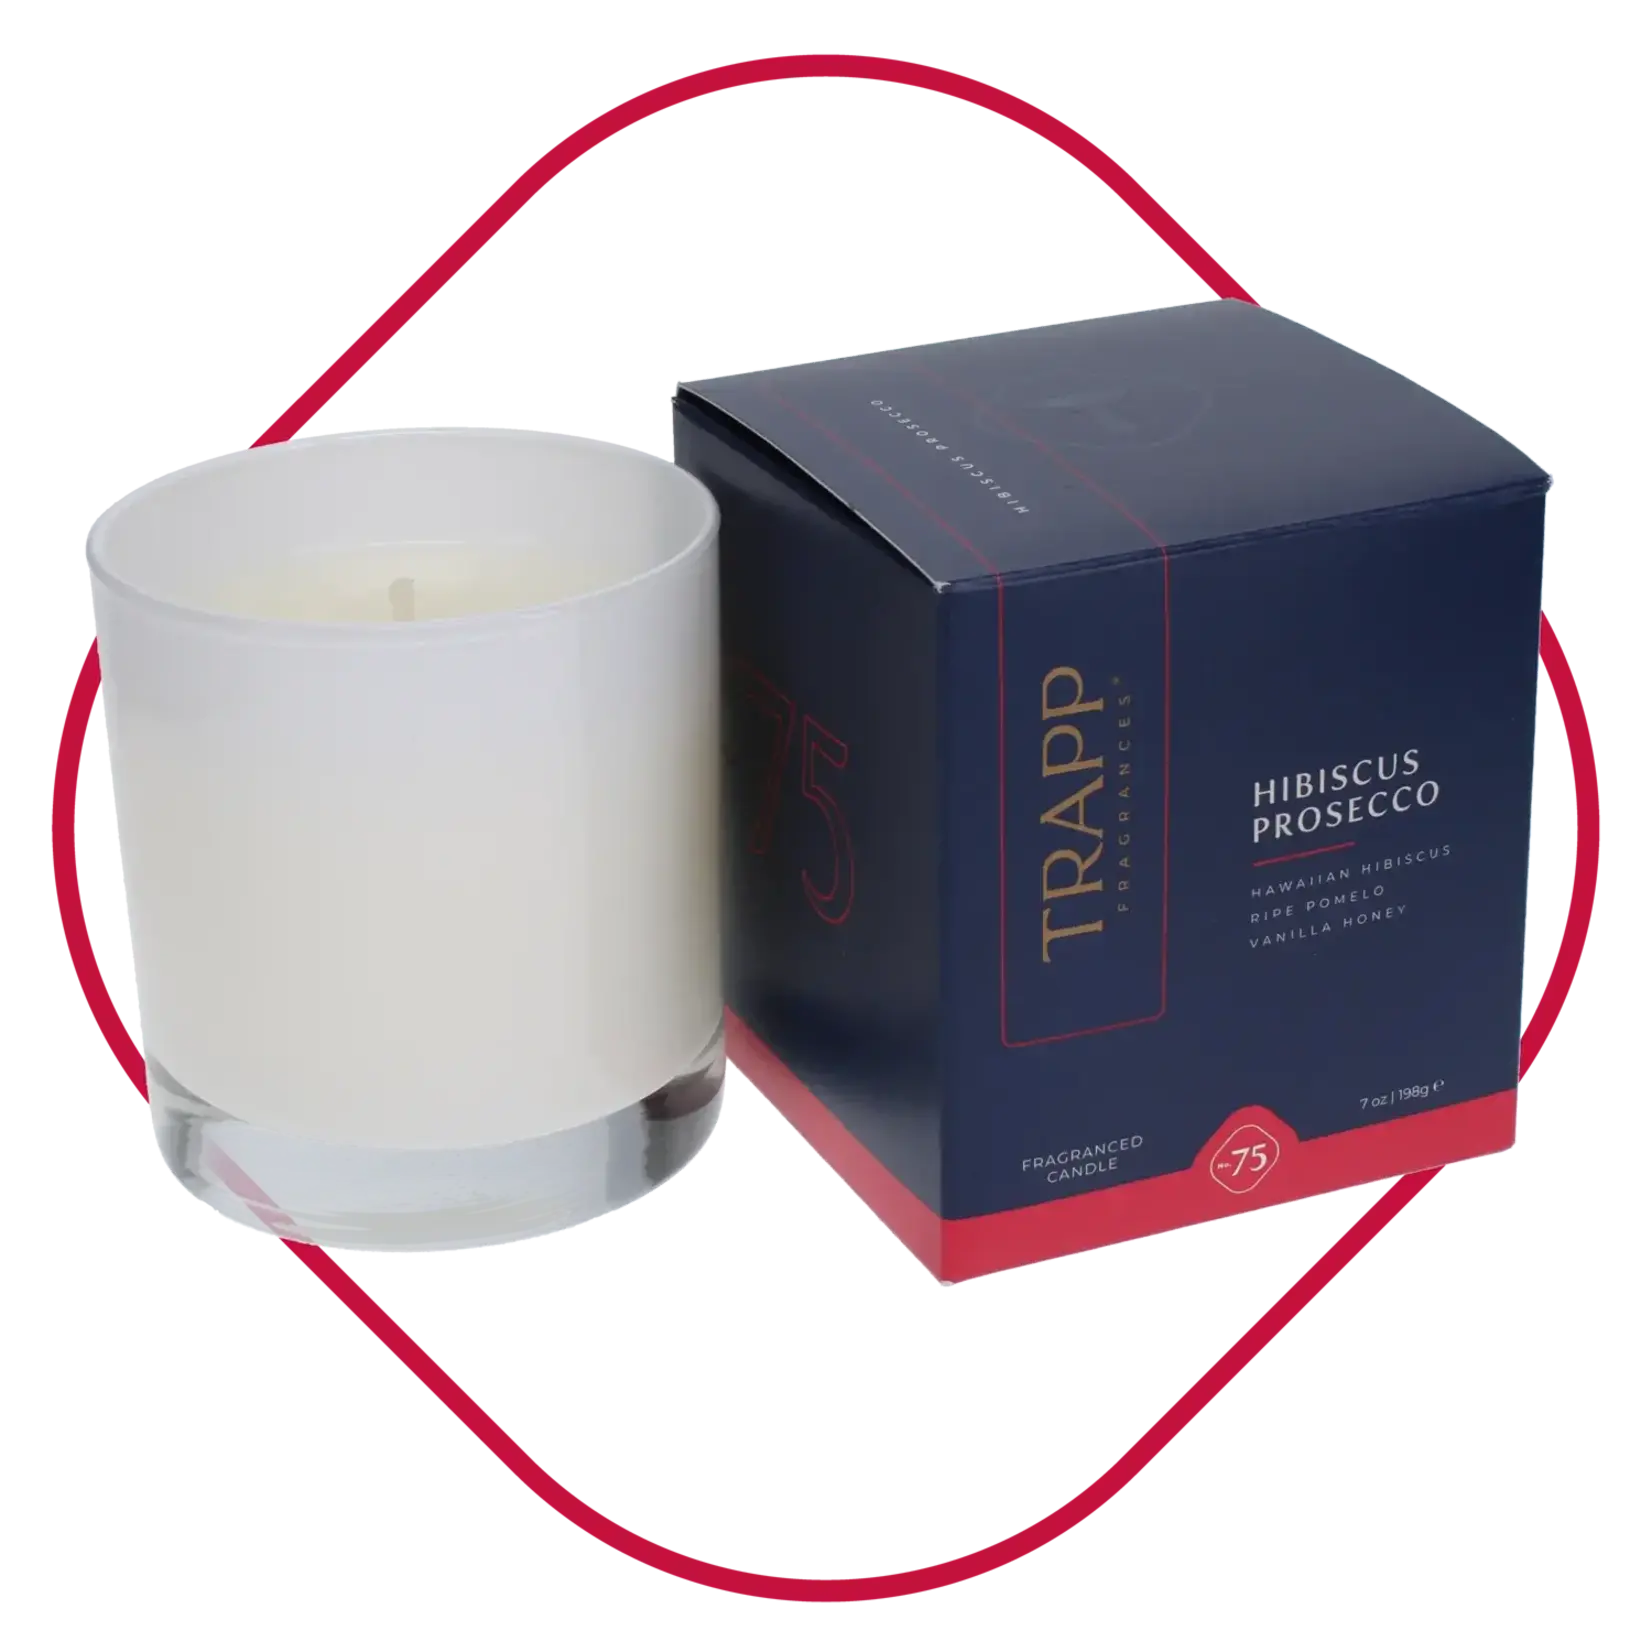 Trapp Candles No. 75  Hibiscus Prosecco Candle 7oz